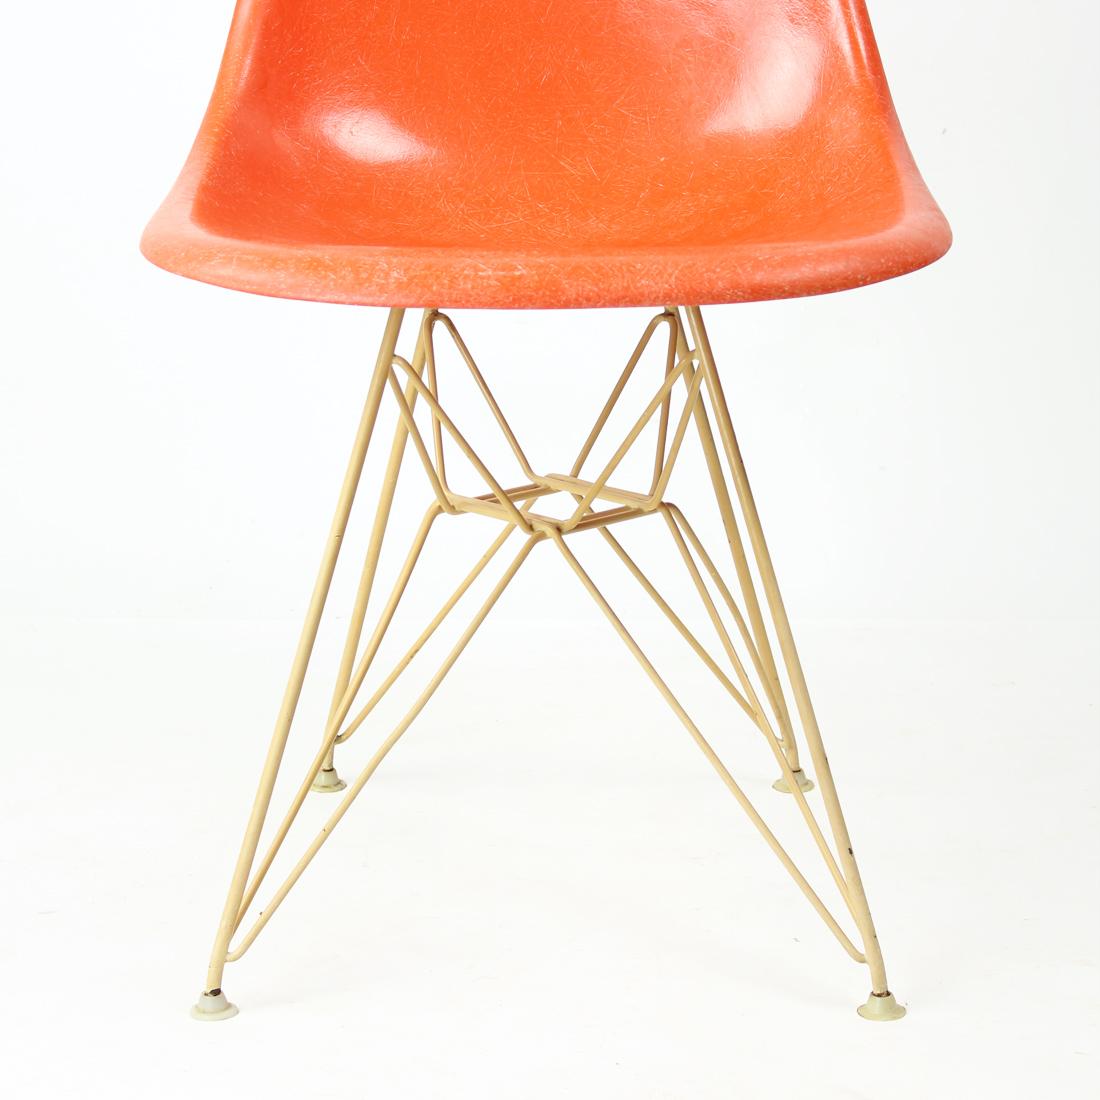 Original 1960s orange fiberglass shell chair designed by Charles and Ray Eames for Herman Miller. The scarse candy orange color has its original finish with the distinct thread texture. The shell is mounted on the original Eiffel base in light cream